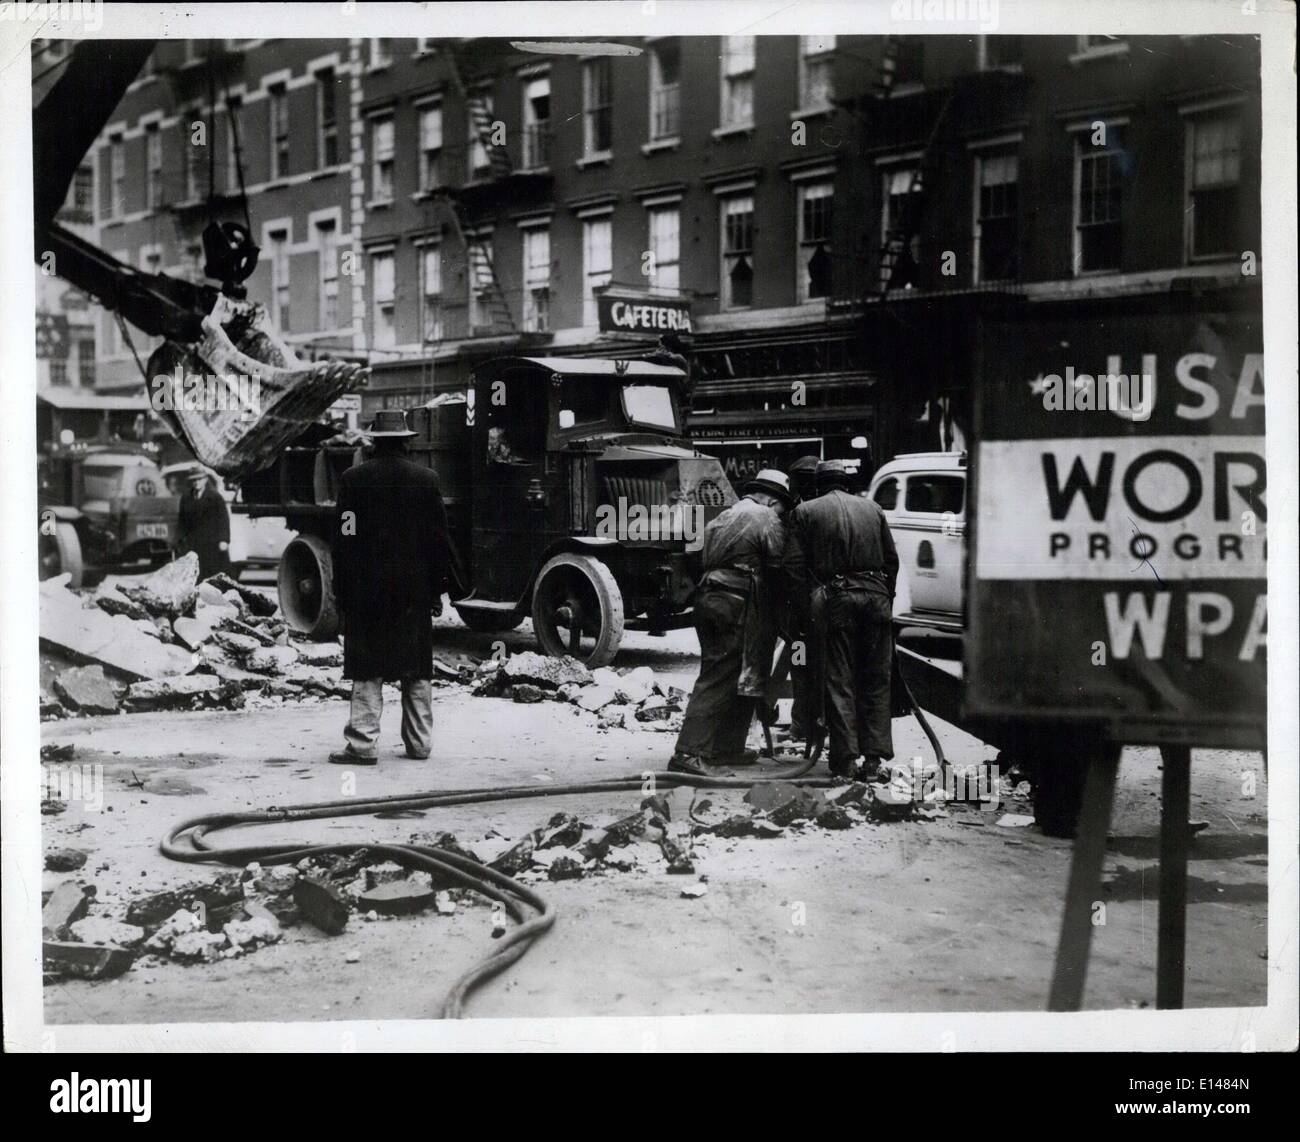 Apr. 17, 2012 - The Roosevelt administration created many jobs for the unemployed during the depression. Photo shows WPA workers repairing New York street. Stock Photo